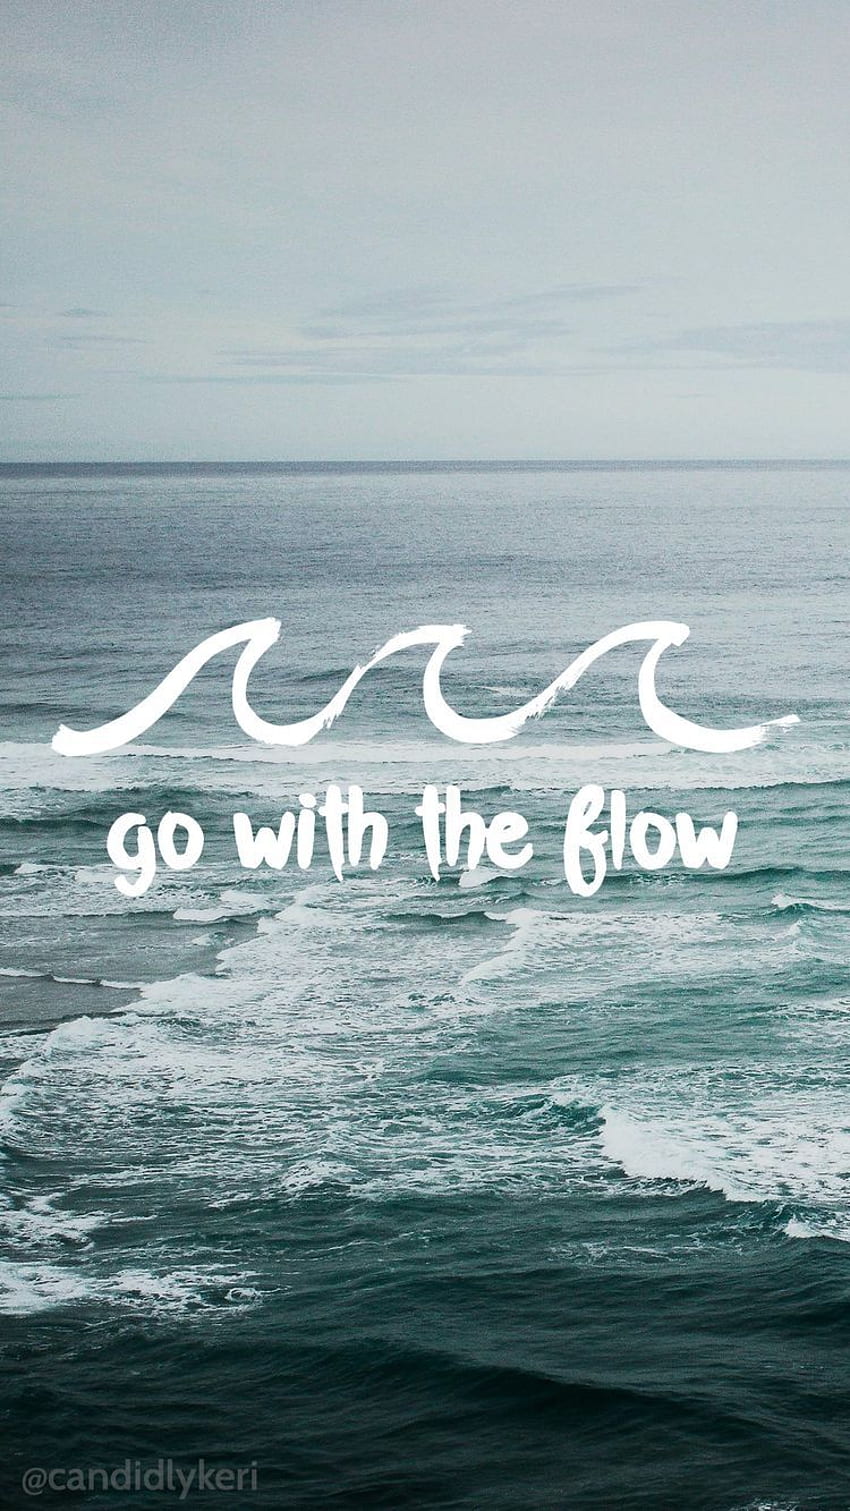 Go with the flow in life. Take it easy. Just breathe HD phone wallpaper